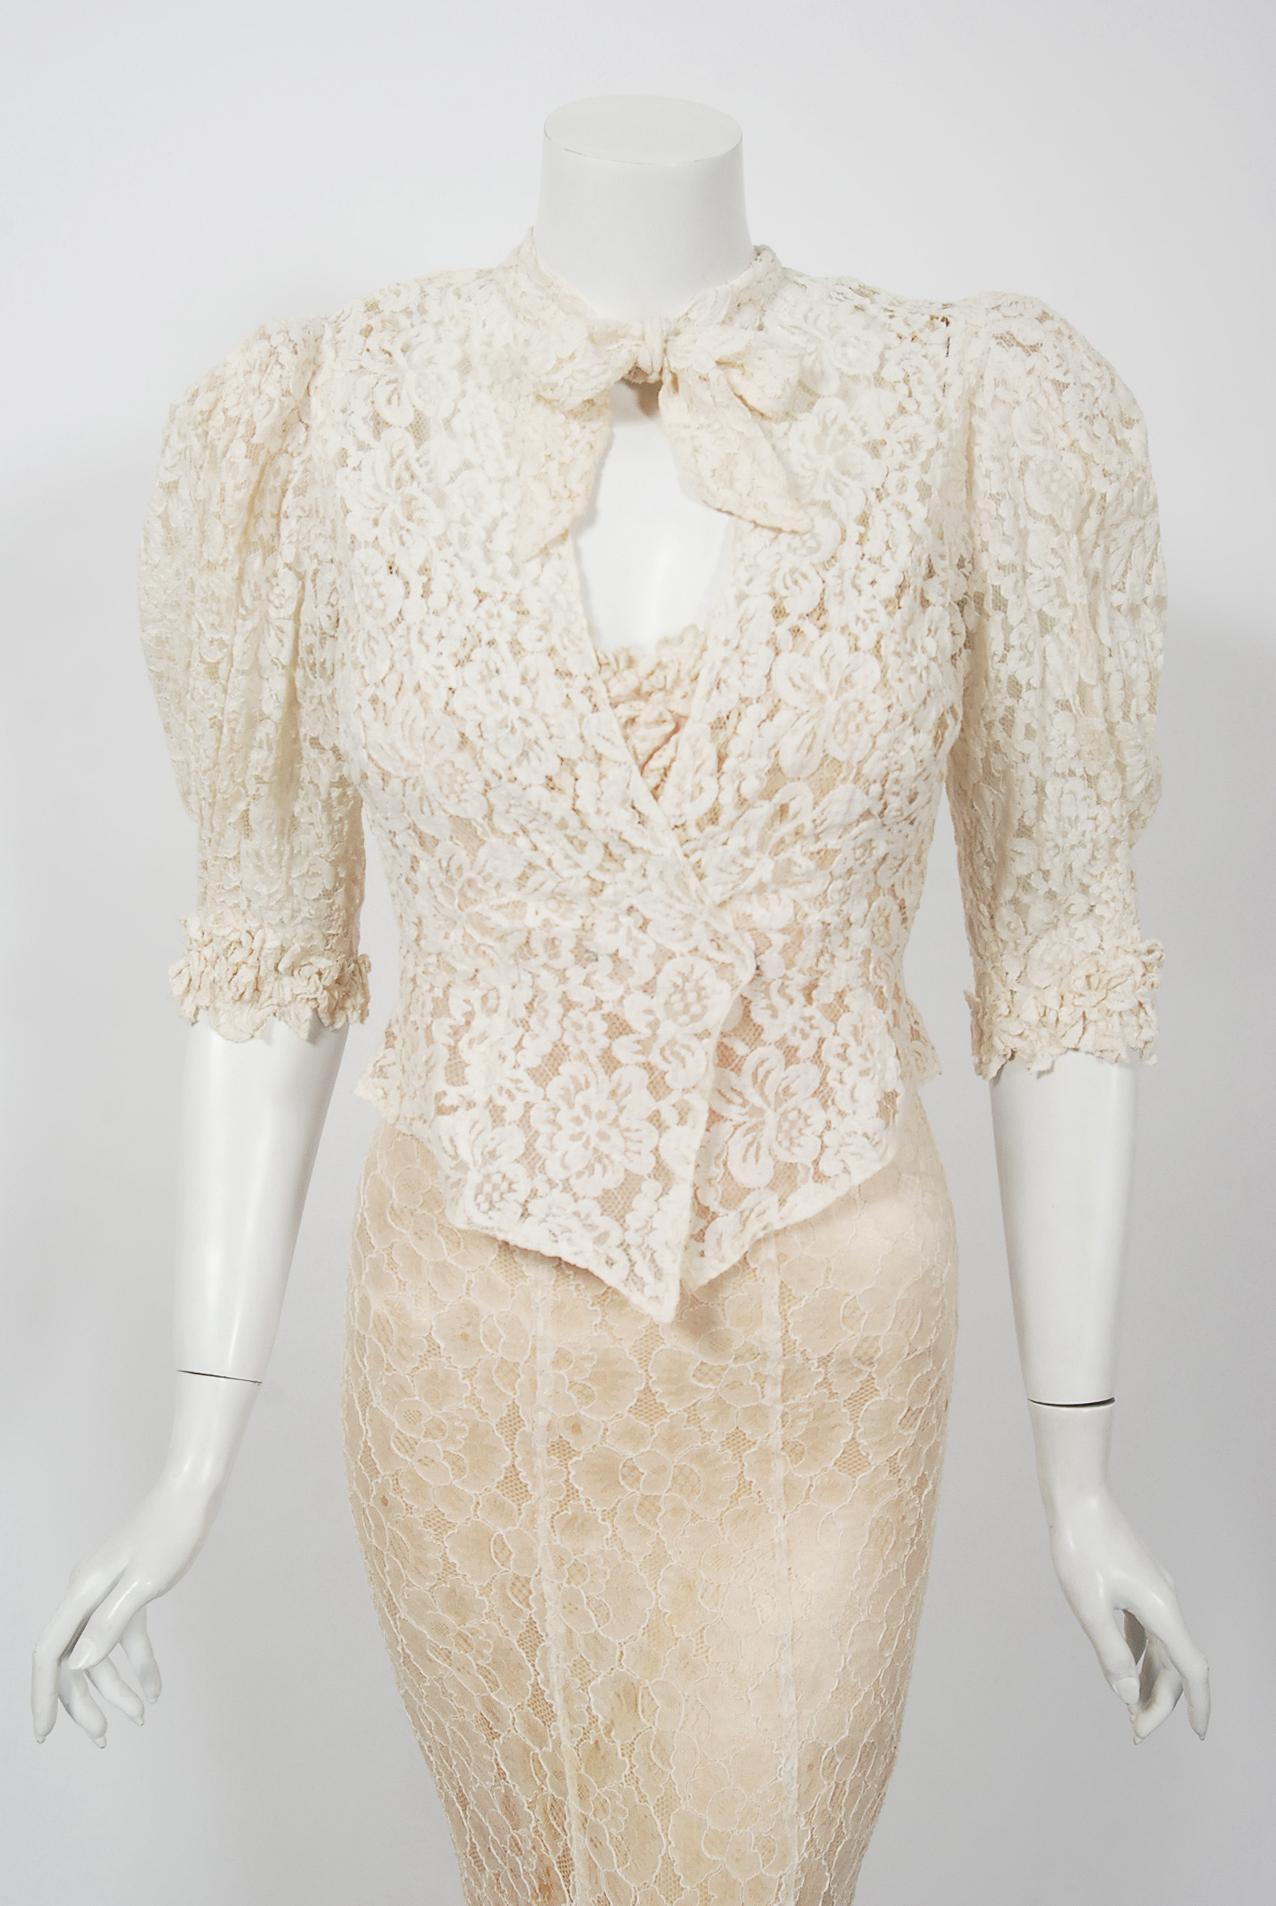 A breathtaking ivory white lace gown ensemble from the 1930's era of 